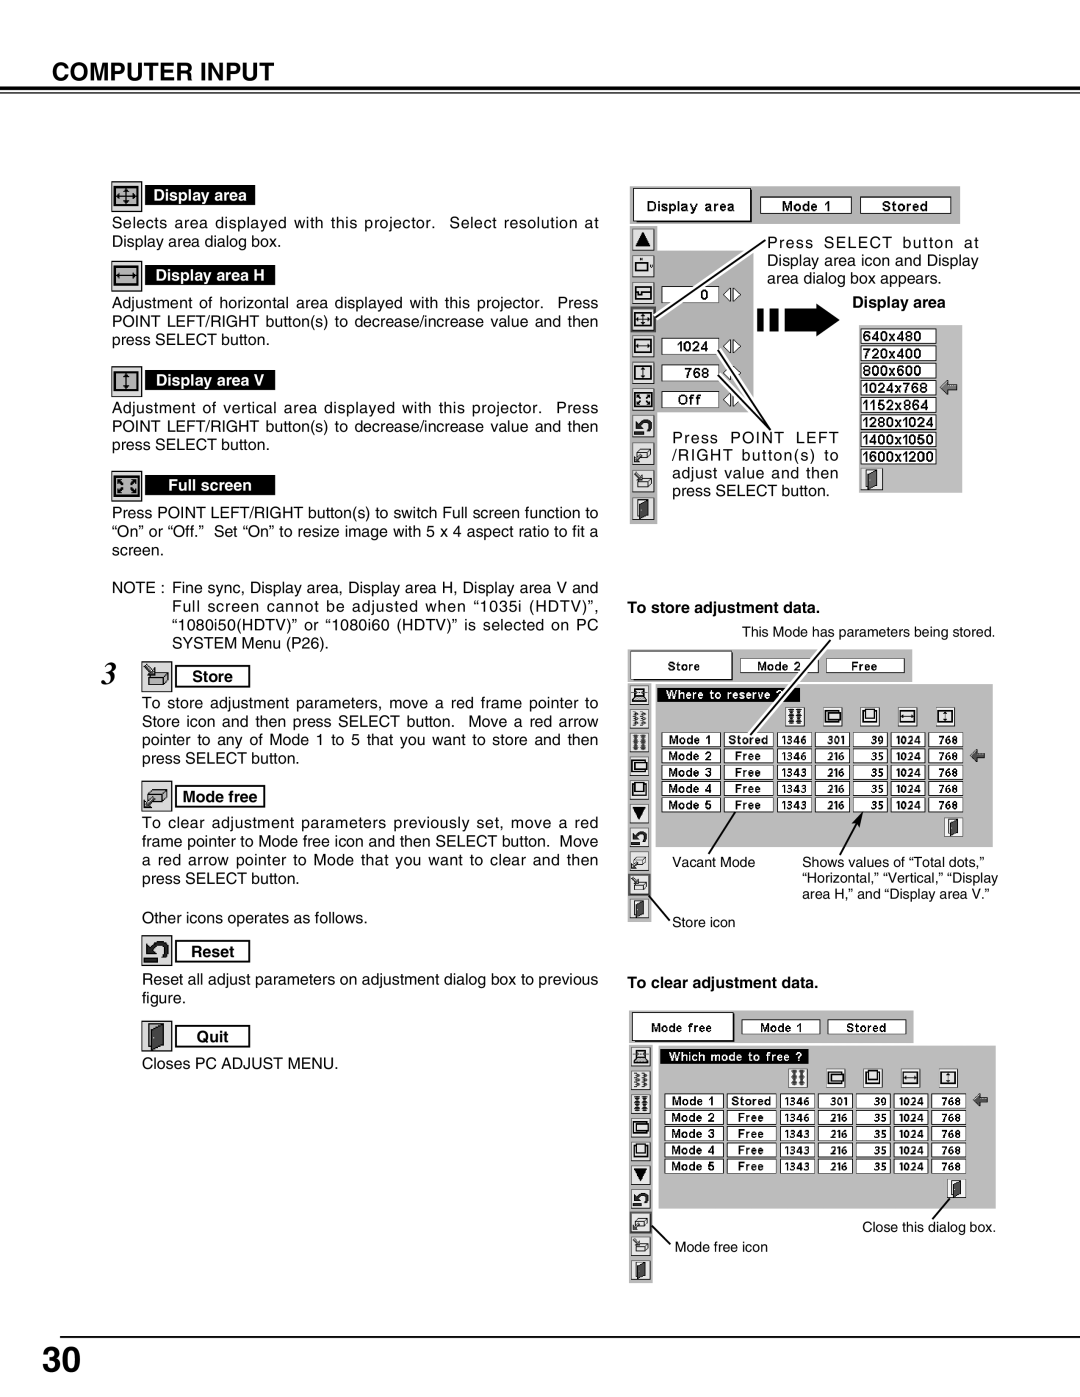 Eiki LC-SX4LA instruction manual Computer Input, Other icons operates as follows 